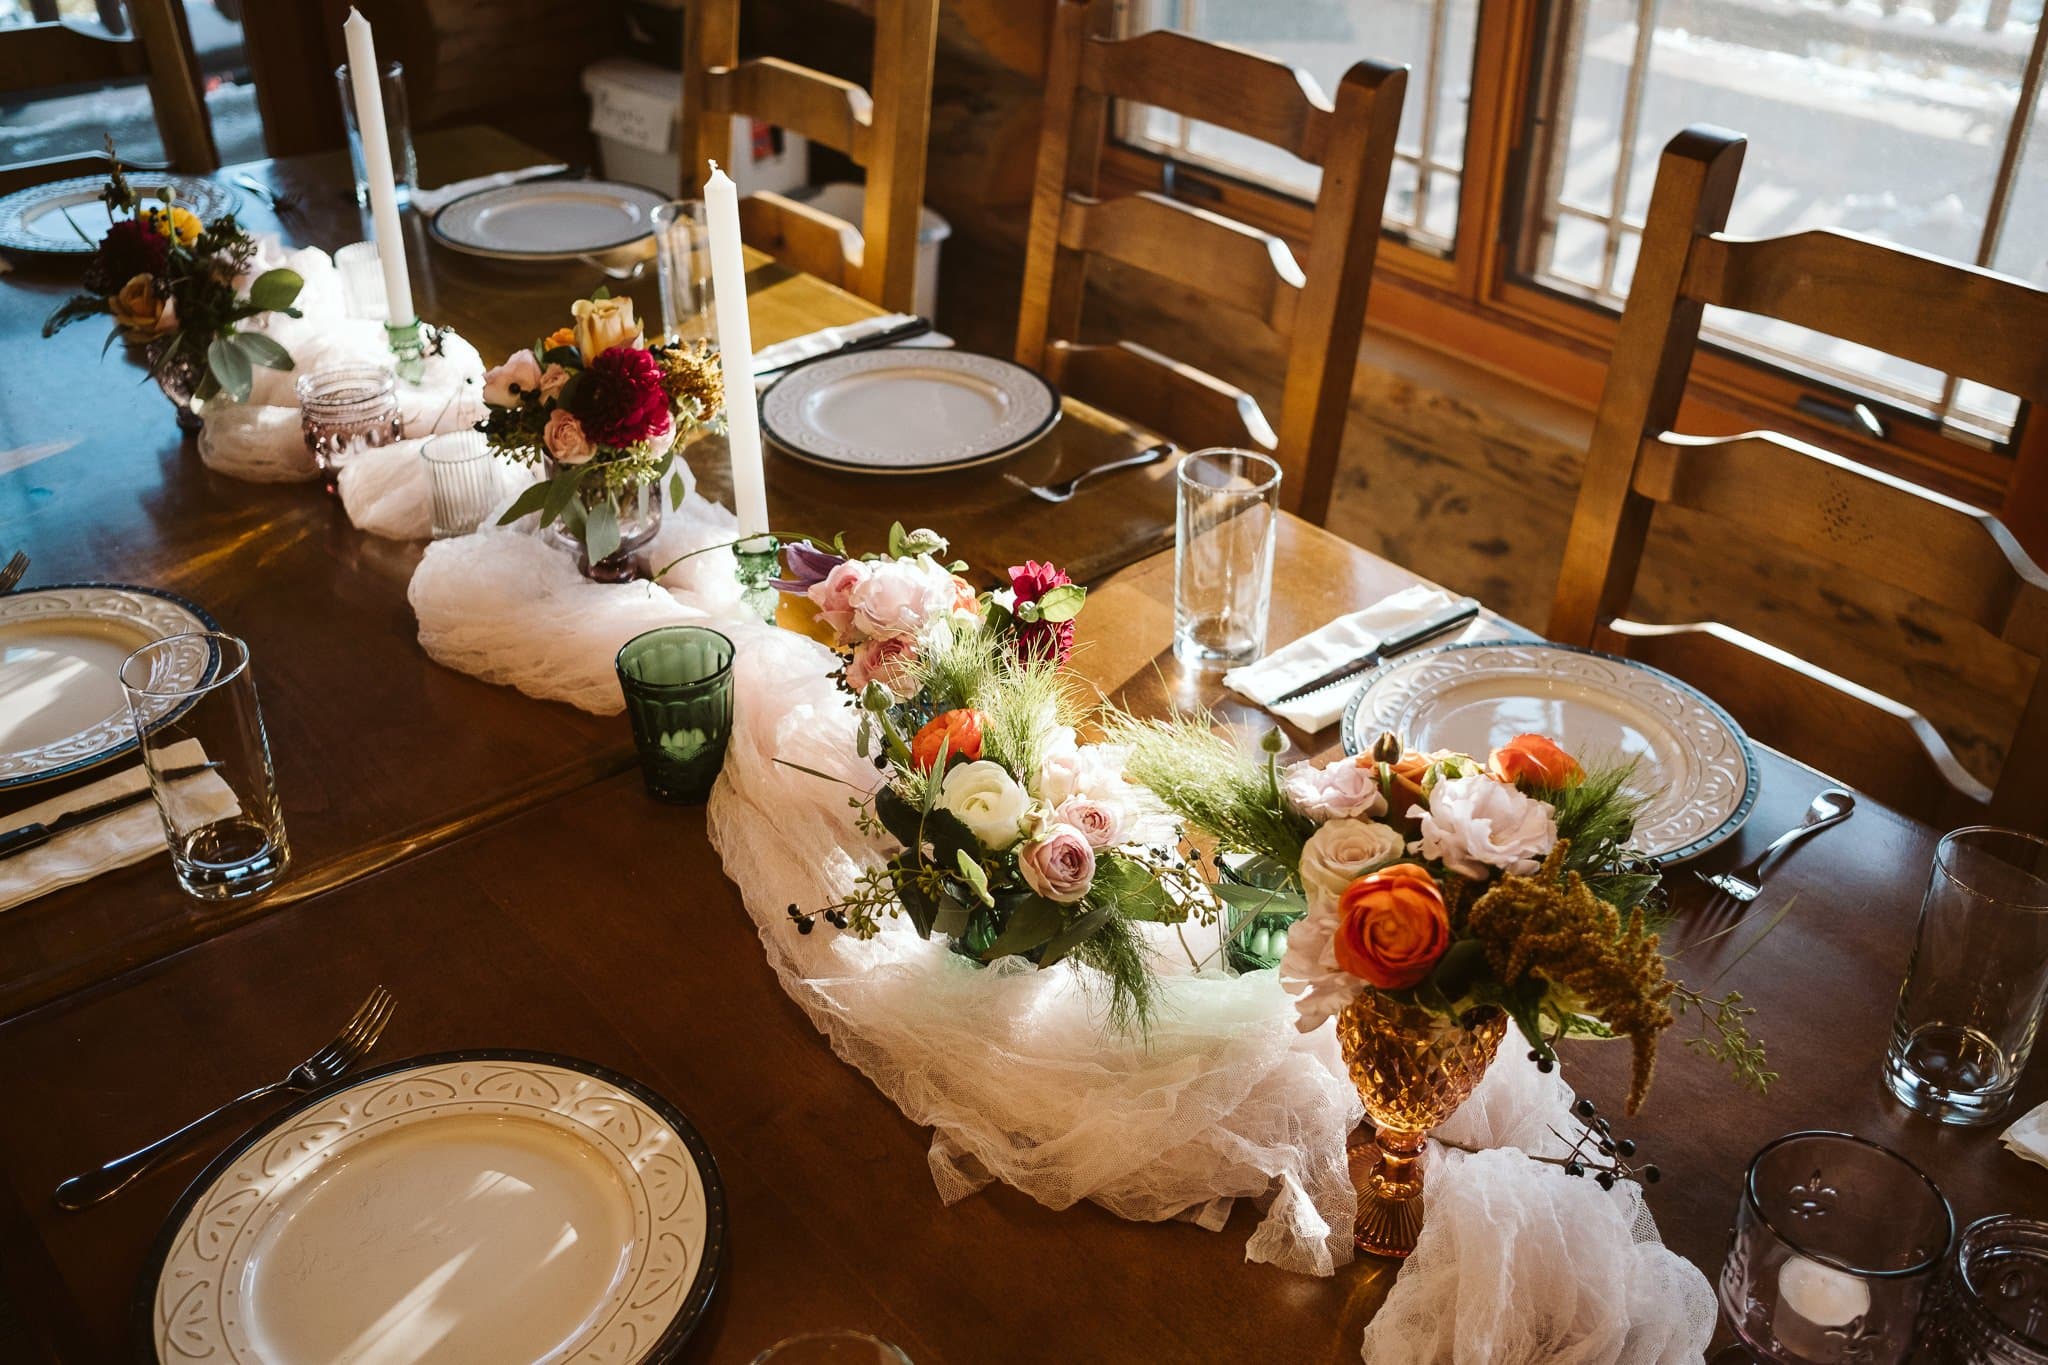 Decorated dining table for intimate elopement reception at private mountain home in the Colorado mountains